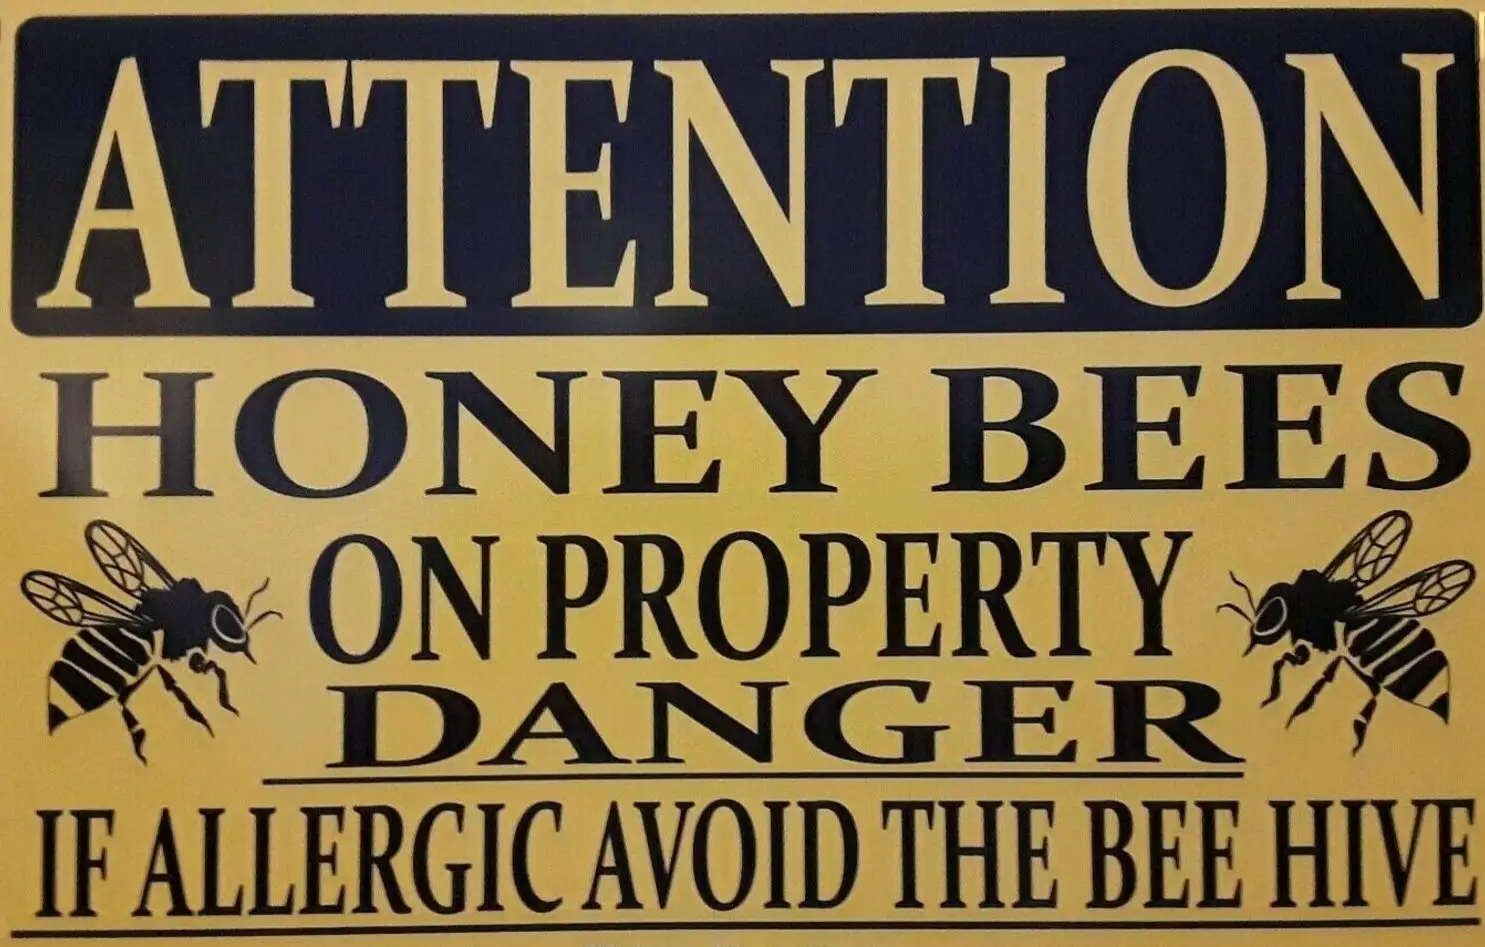 

Attention Honey Bees Caution Warning Bee Keeping Funny Metal Sign Farmhouse Farm Family Cafe Retro Wall Decoration Christmas